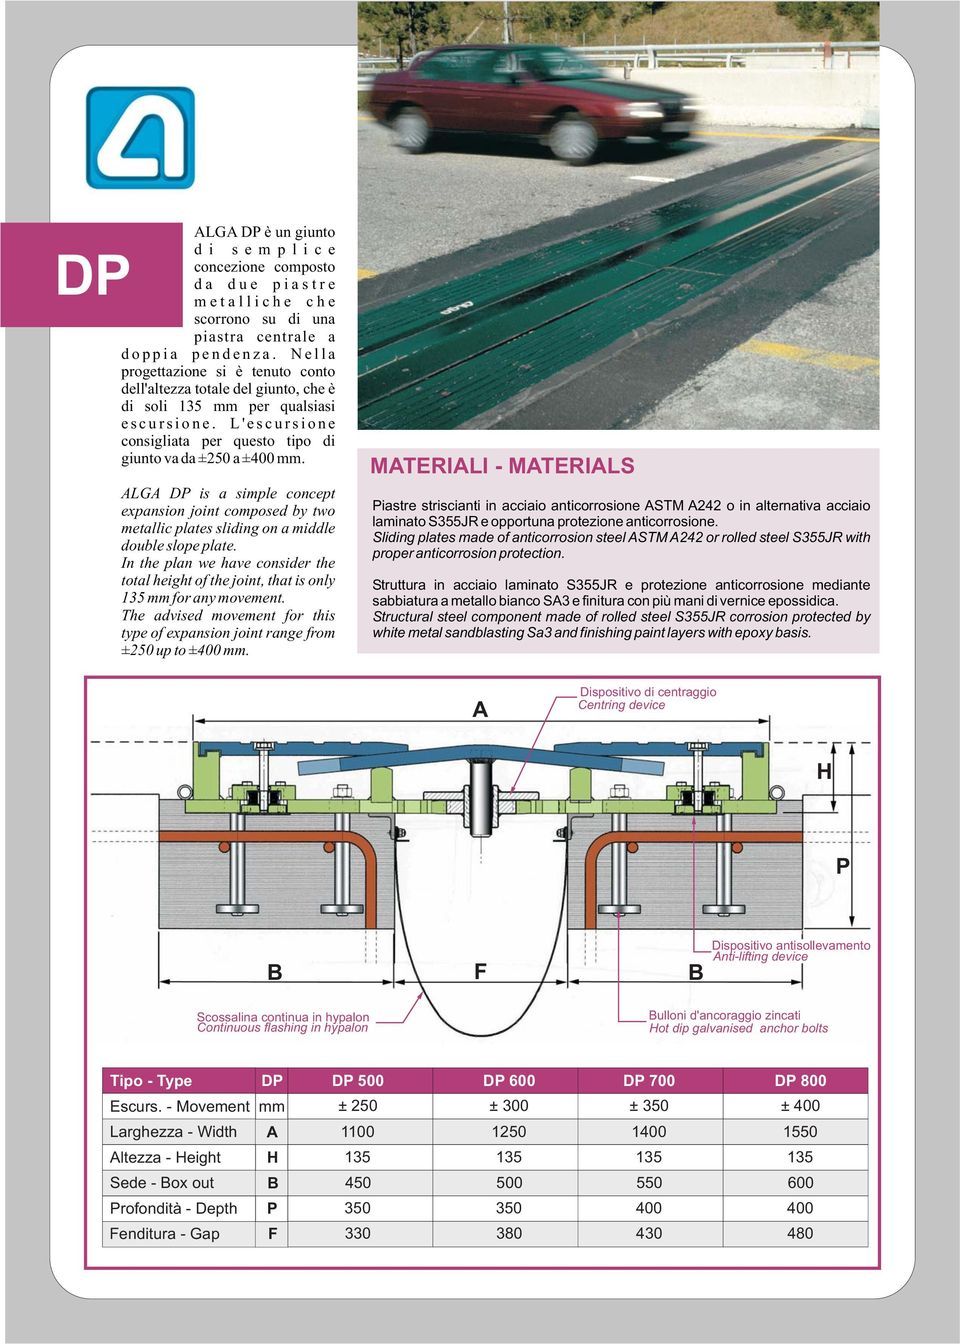 LG DP is a simple concept expansion joint composed by two metallic plates sliding on a middle double slope plate.